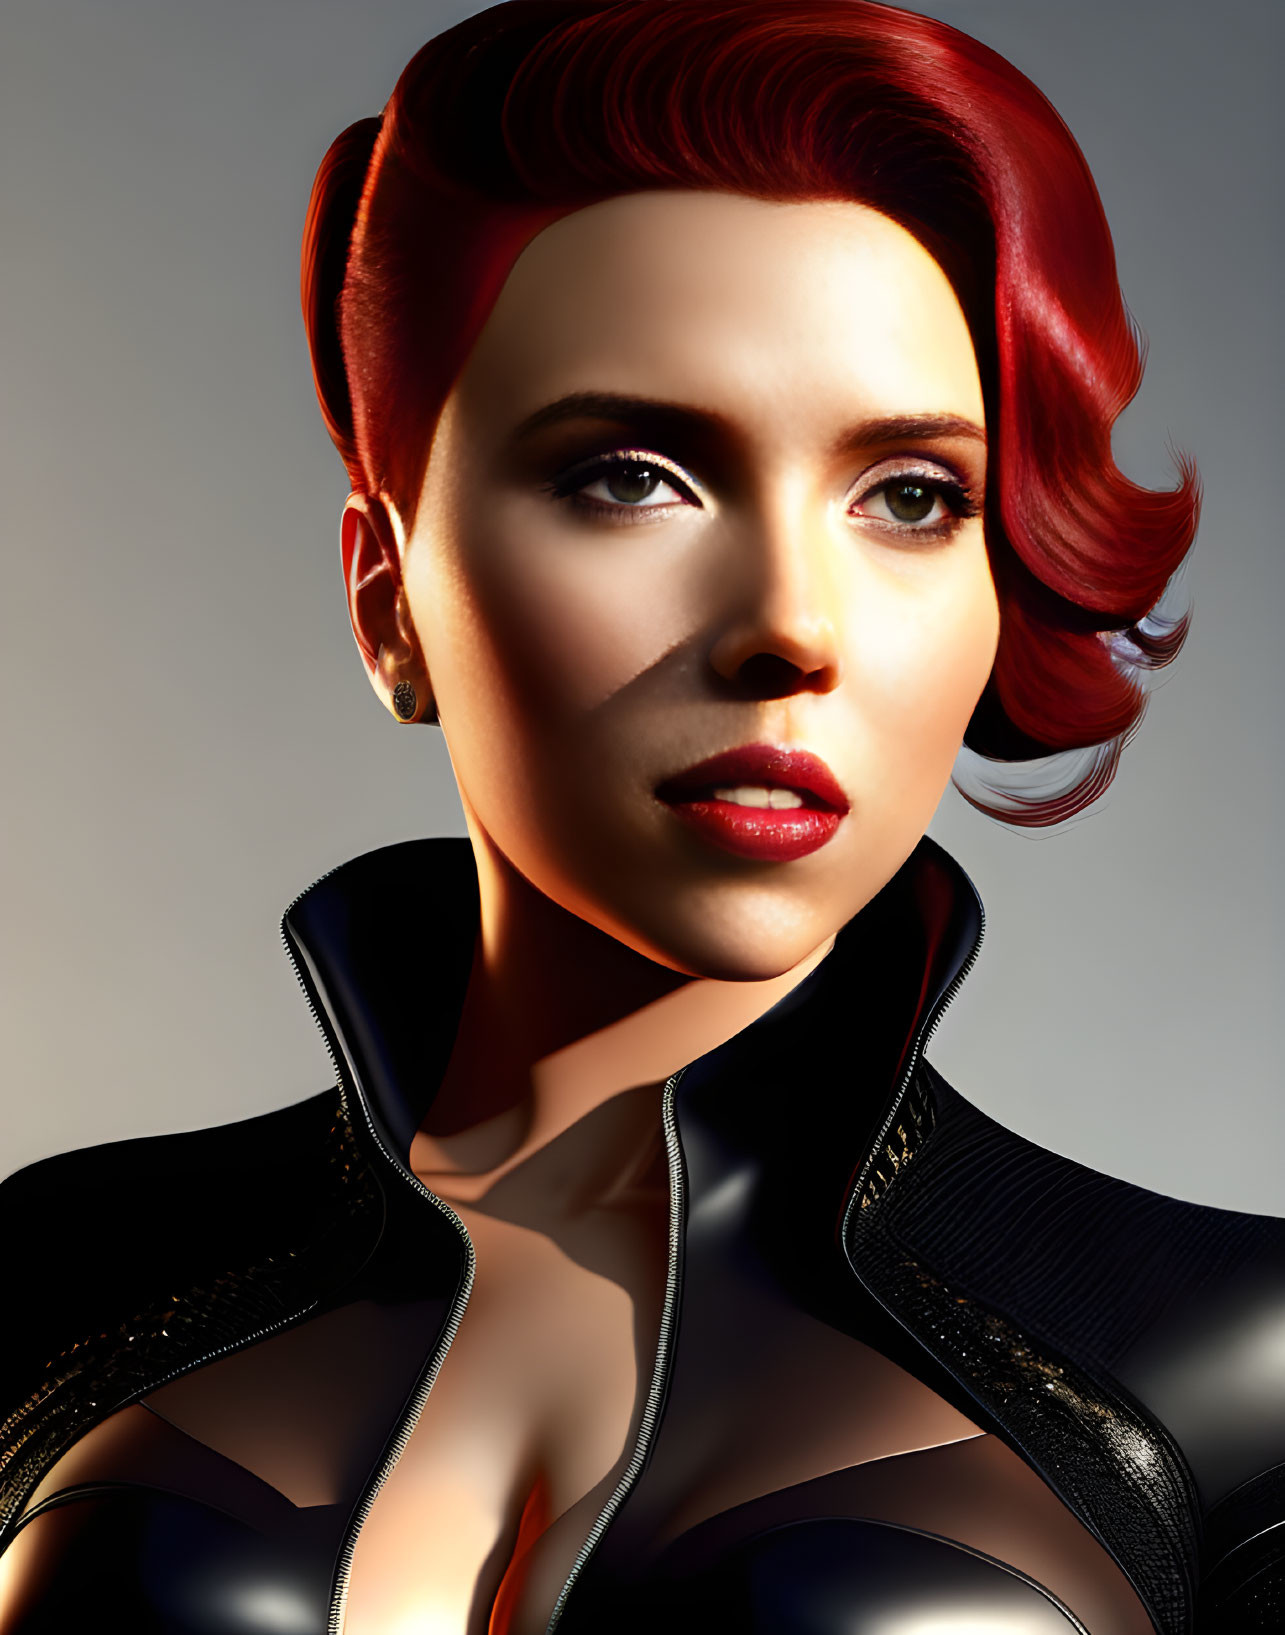 Photorealistic 3D rendering of woman with red wavy hair in black leather outfit